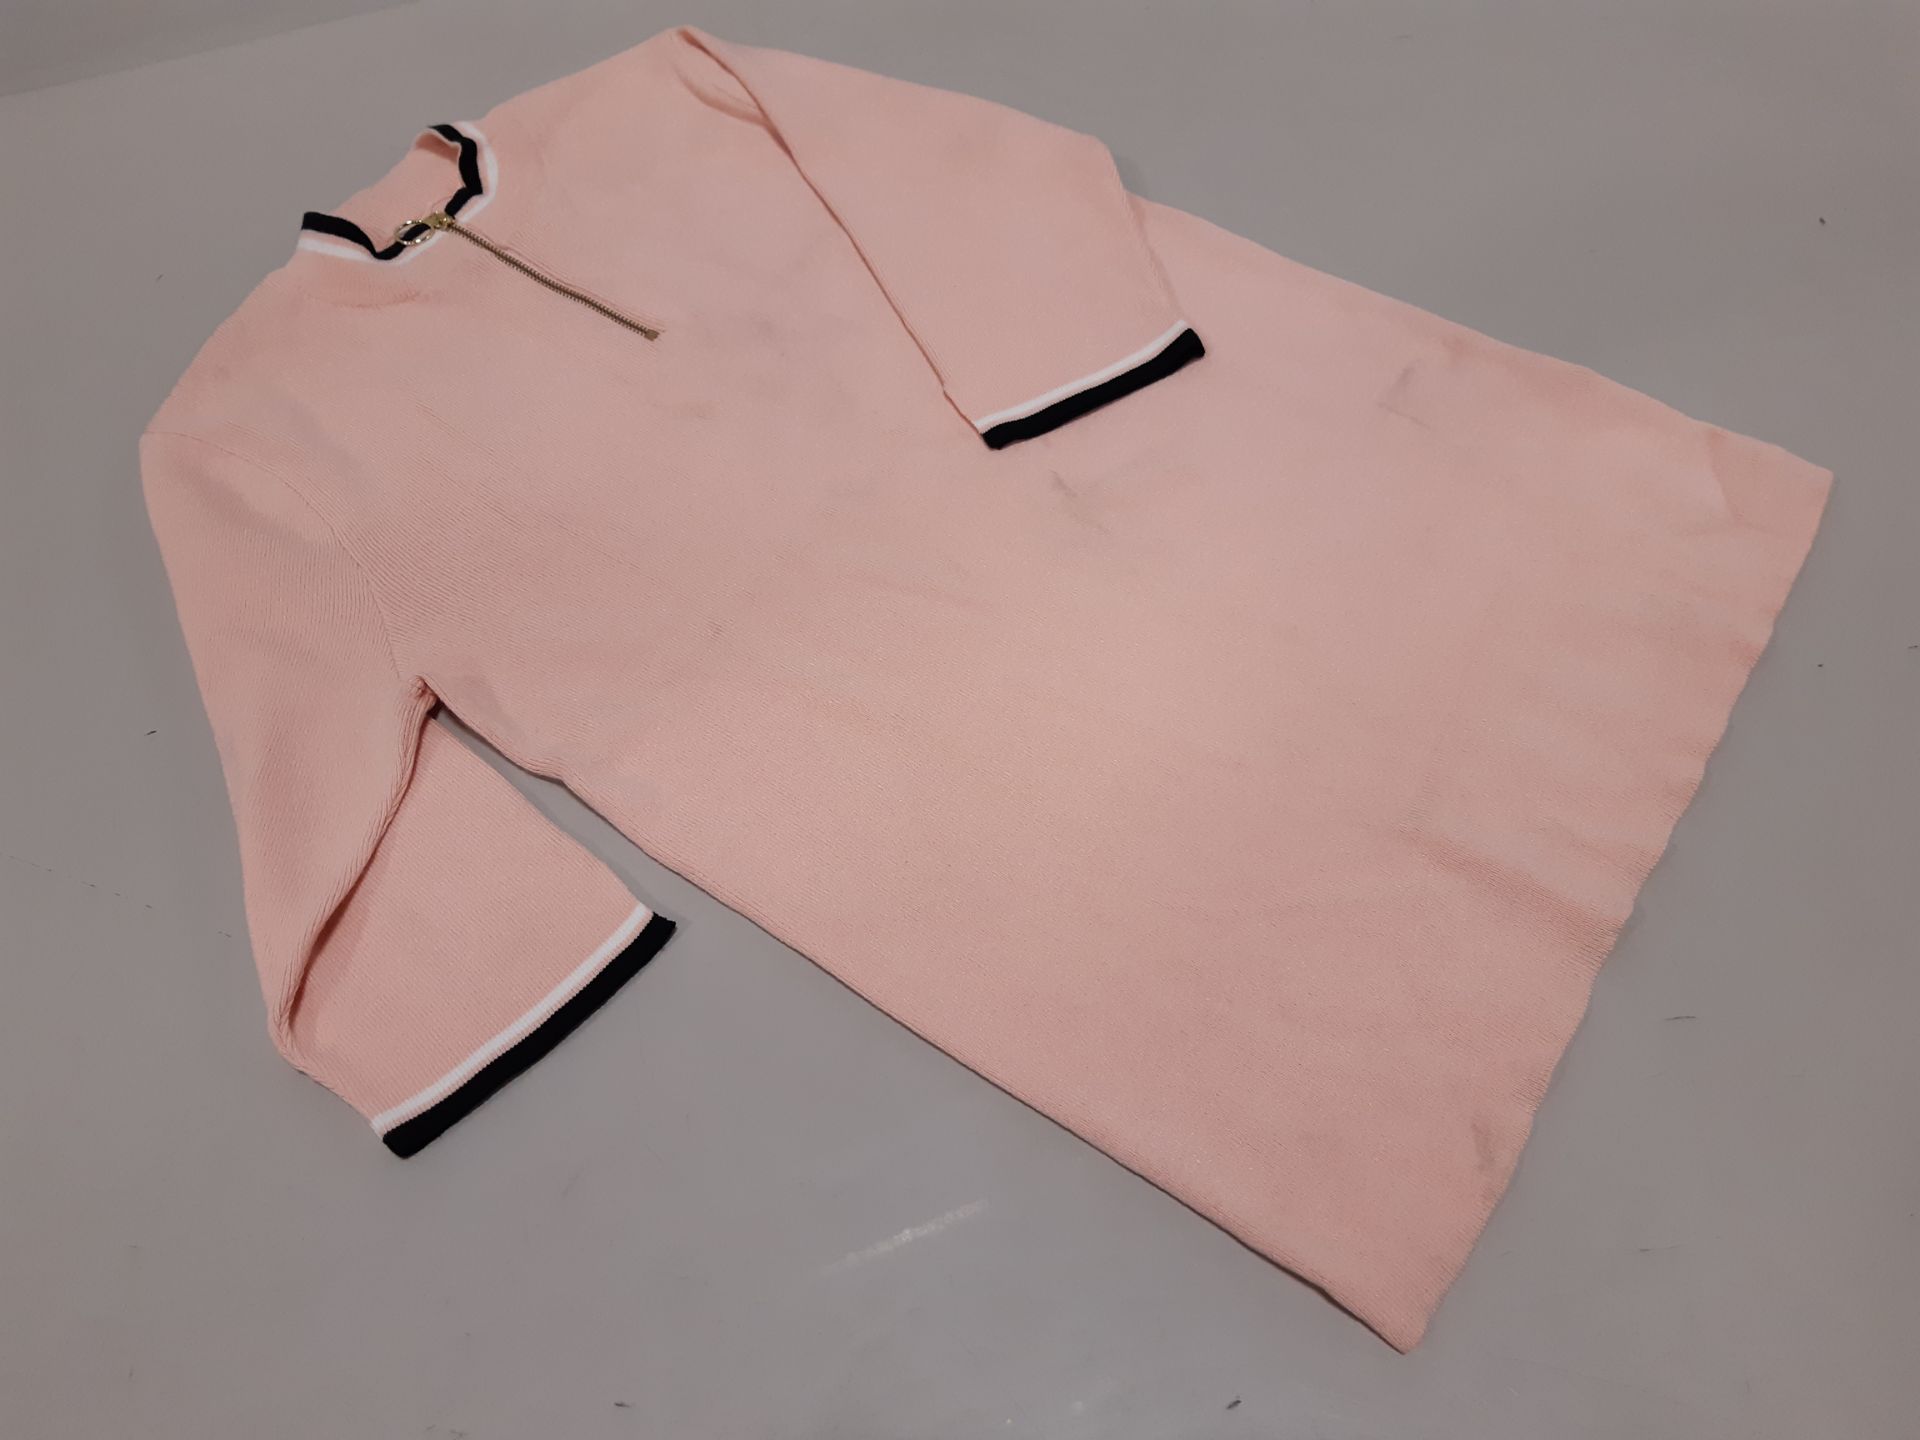 40 X BRAND NEW NEXT LADIES BLUSH COLOURED STRECH TOPS IN VARIOUS SIZES - RRP £24.00pp